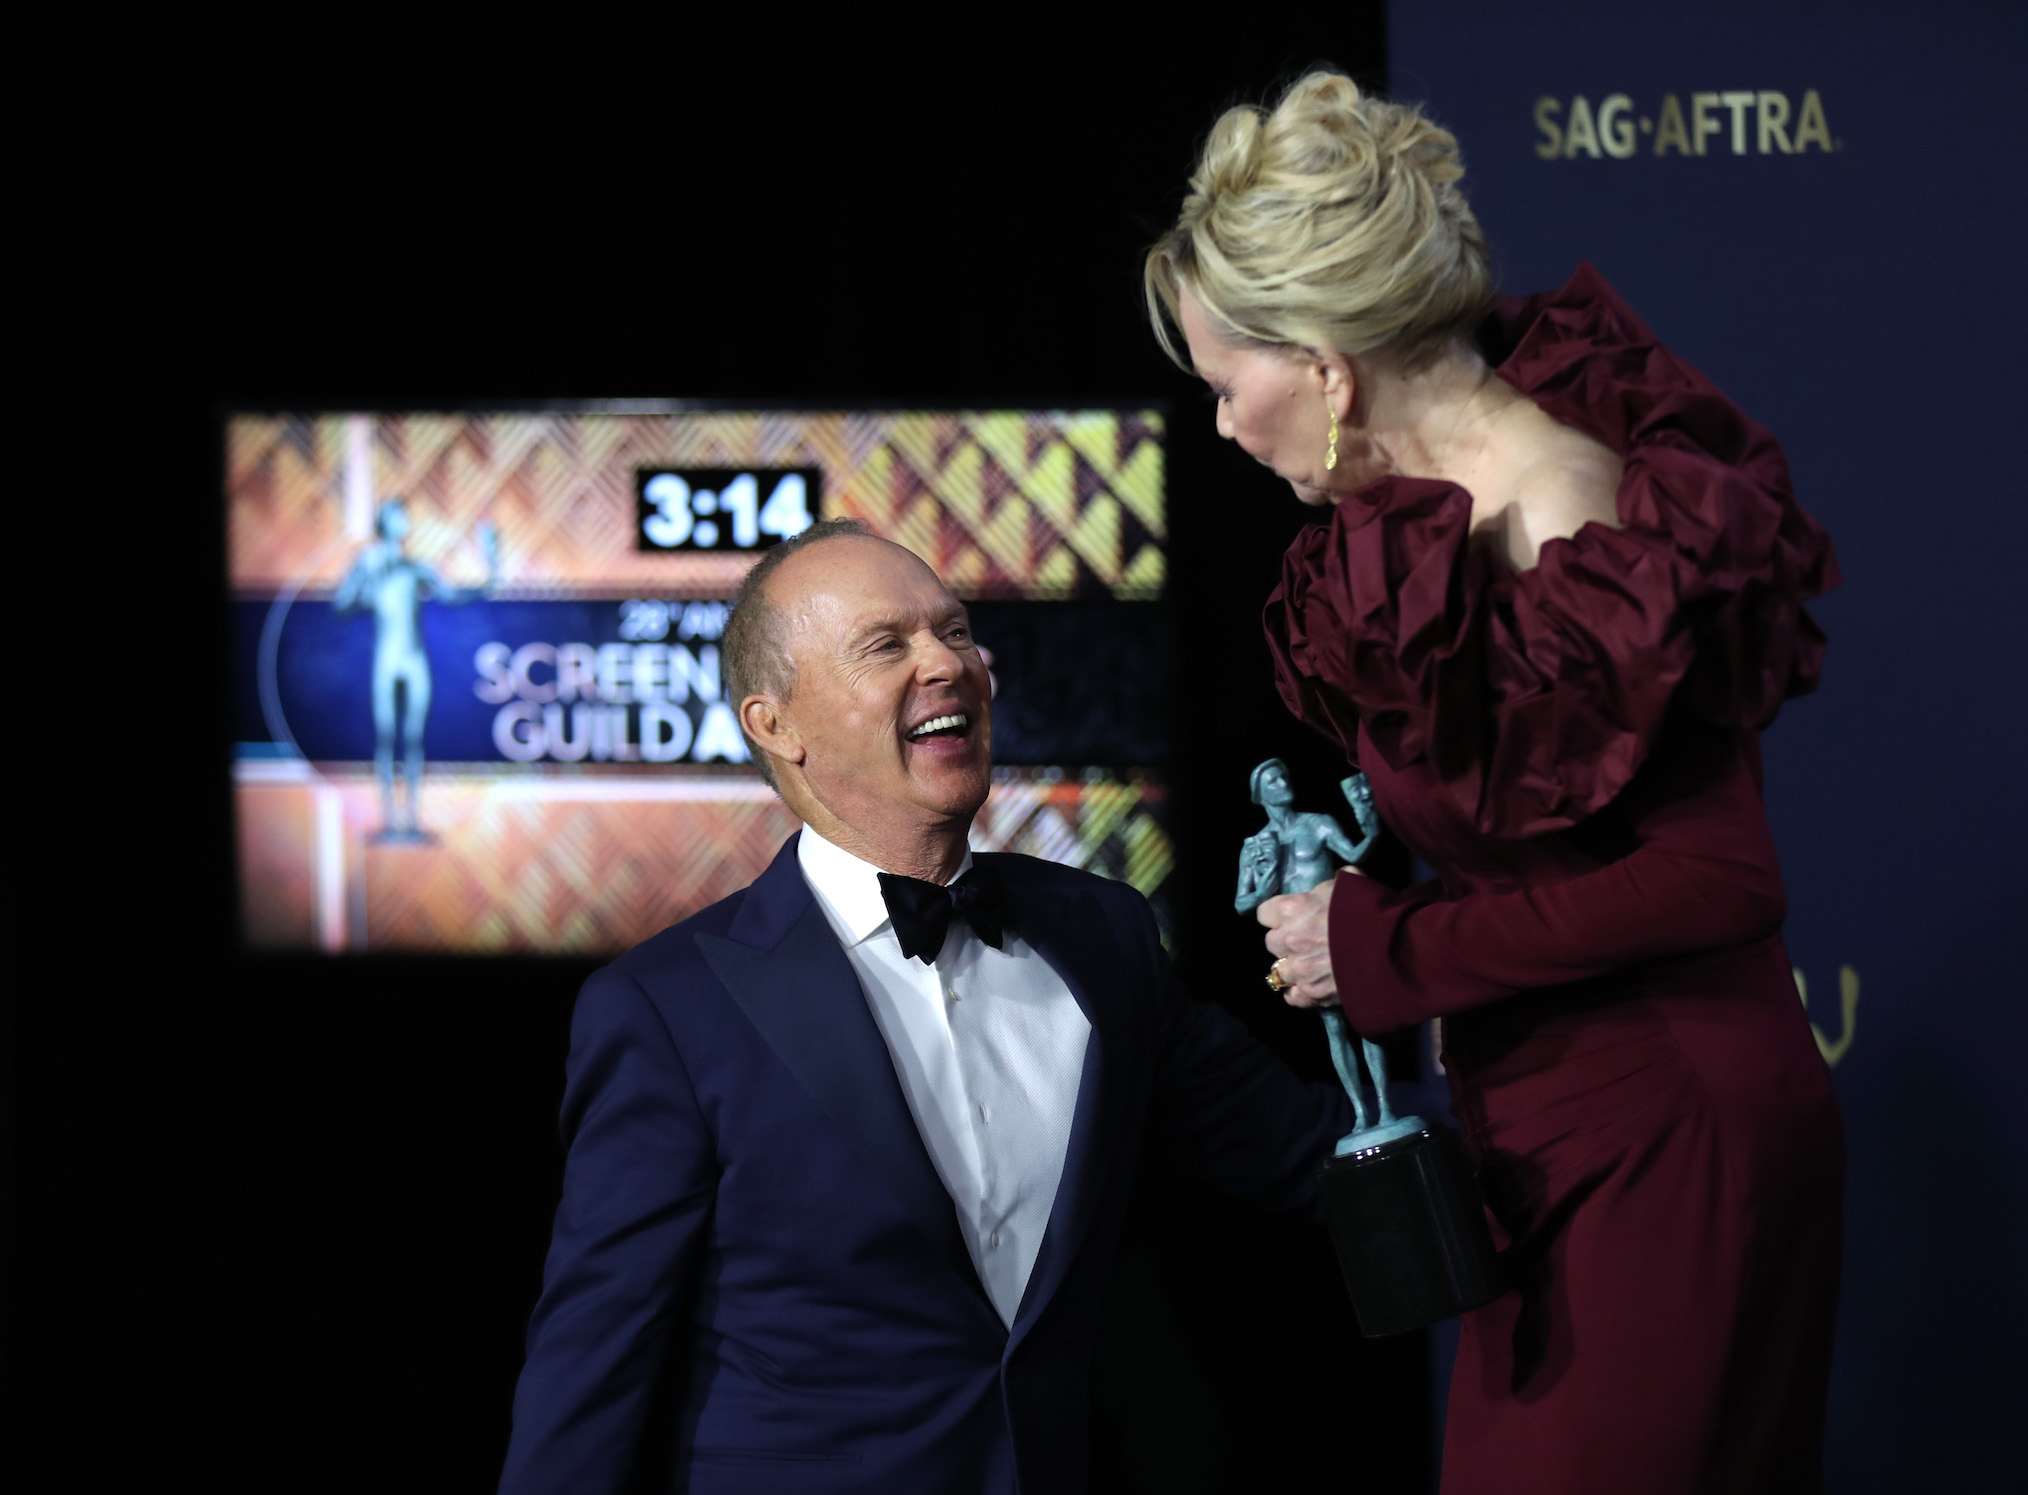 Michael Keaton and Jean Smart at the 2022 Screen Actors Guild Awards